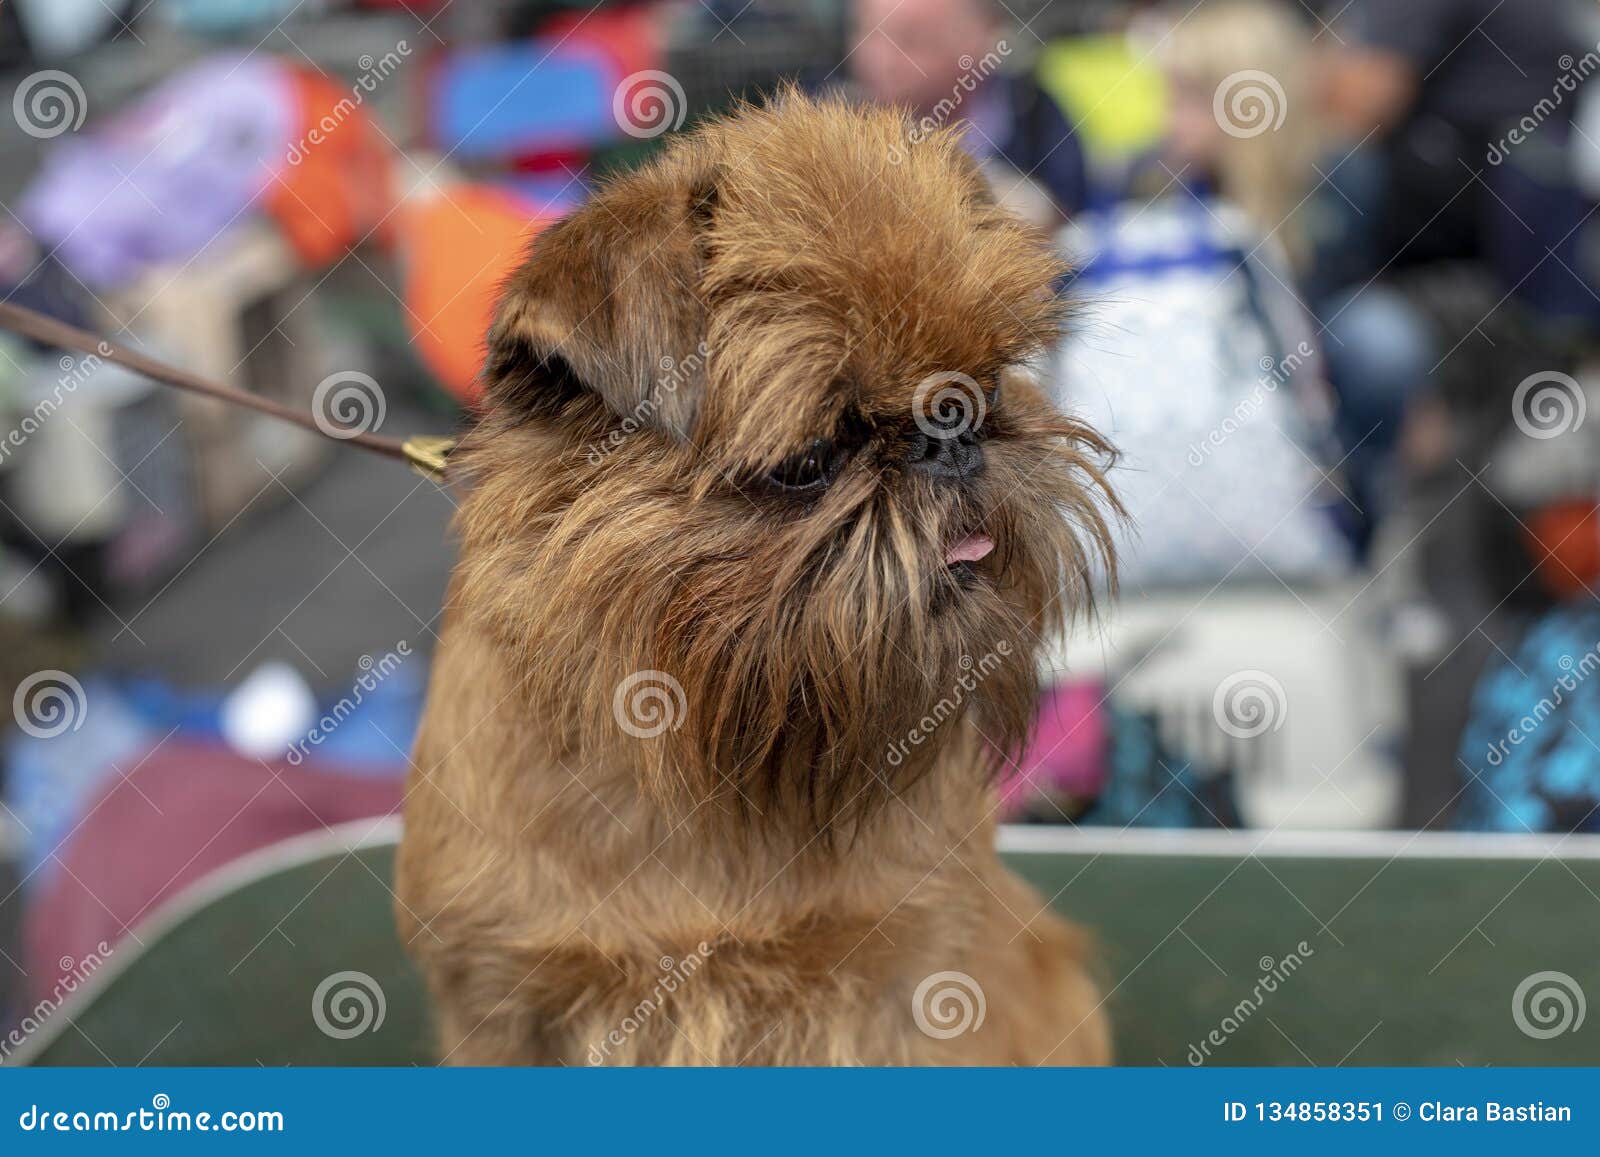 Little Brussels Griffon Dog With His Tongue Out Of His Mouth On A Leash Stock Image Image Of Ewoks Brown 134858351